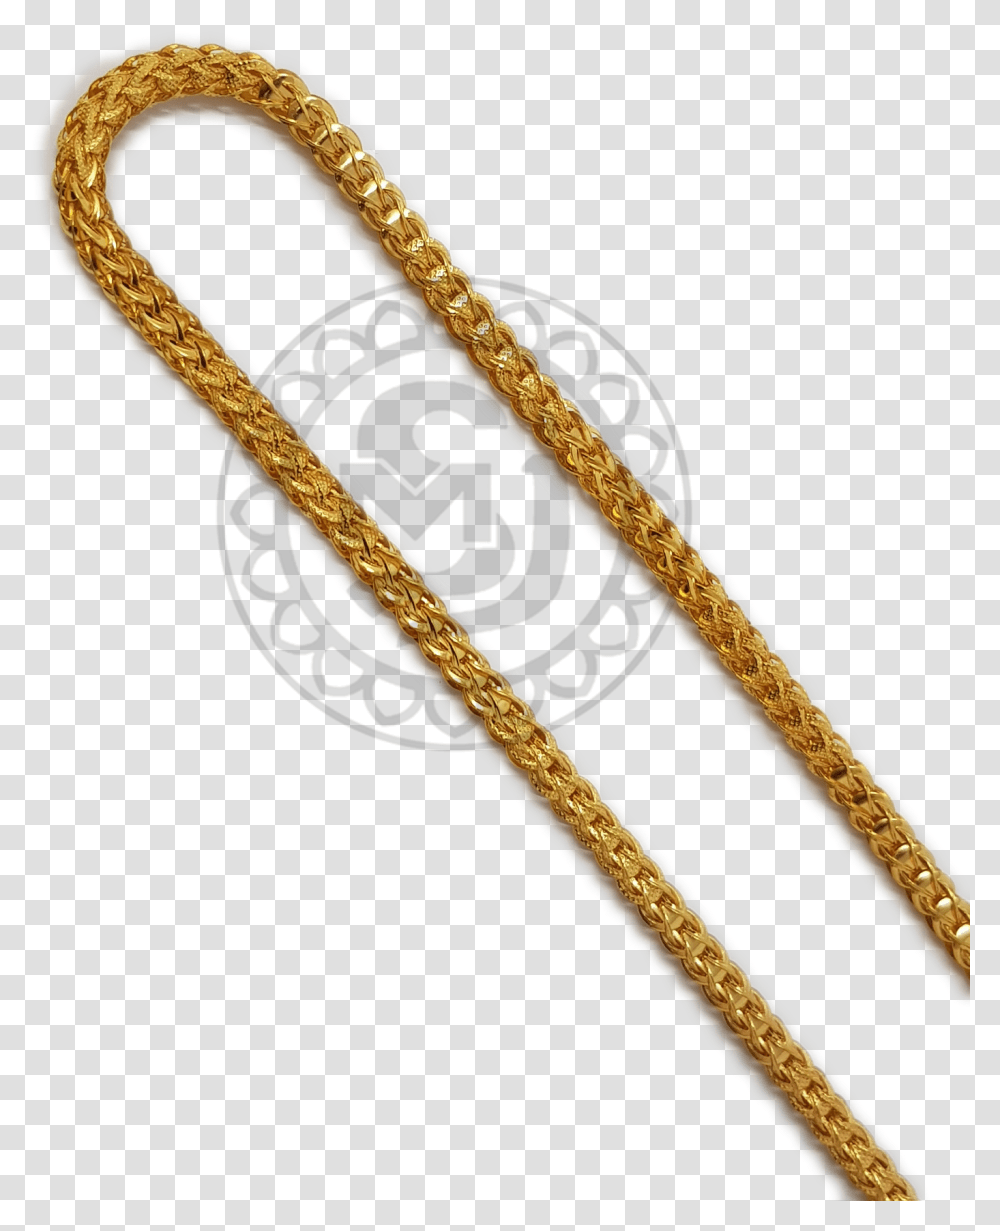 Gold Rope Chain Chain, Stick, Cane Transparent Png